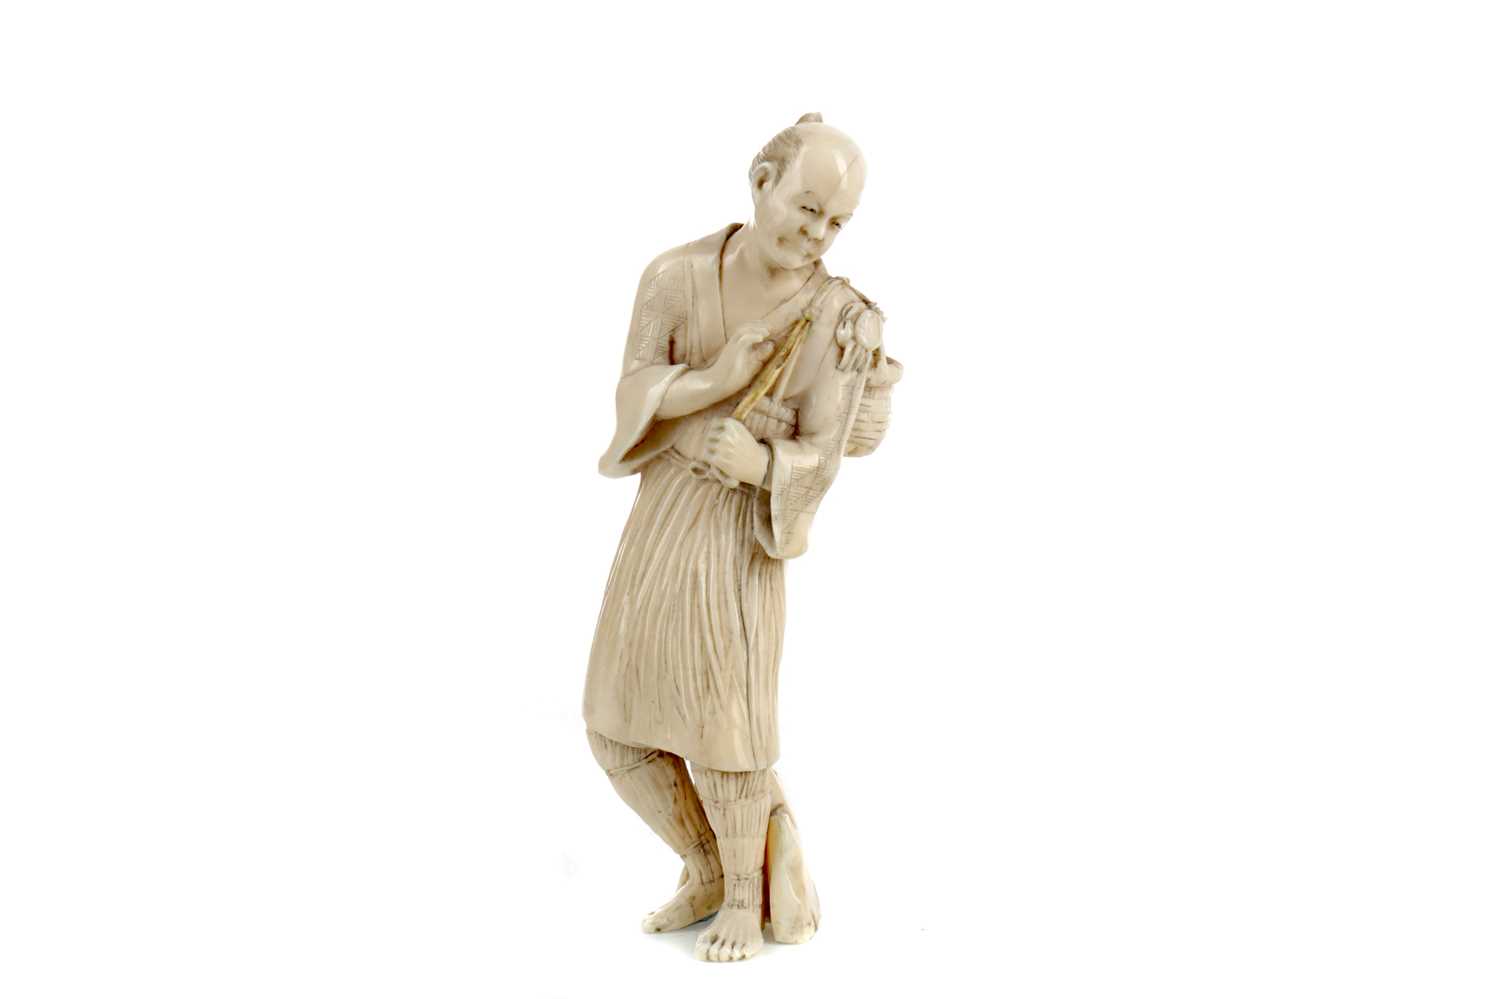 Lot 624 - AN EARLY 20TH CENTURY JAPANESE IVORY CARVING